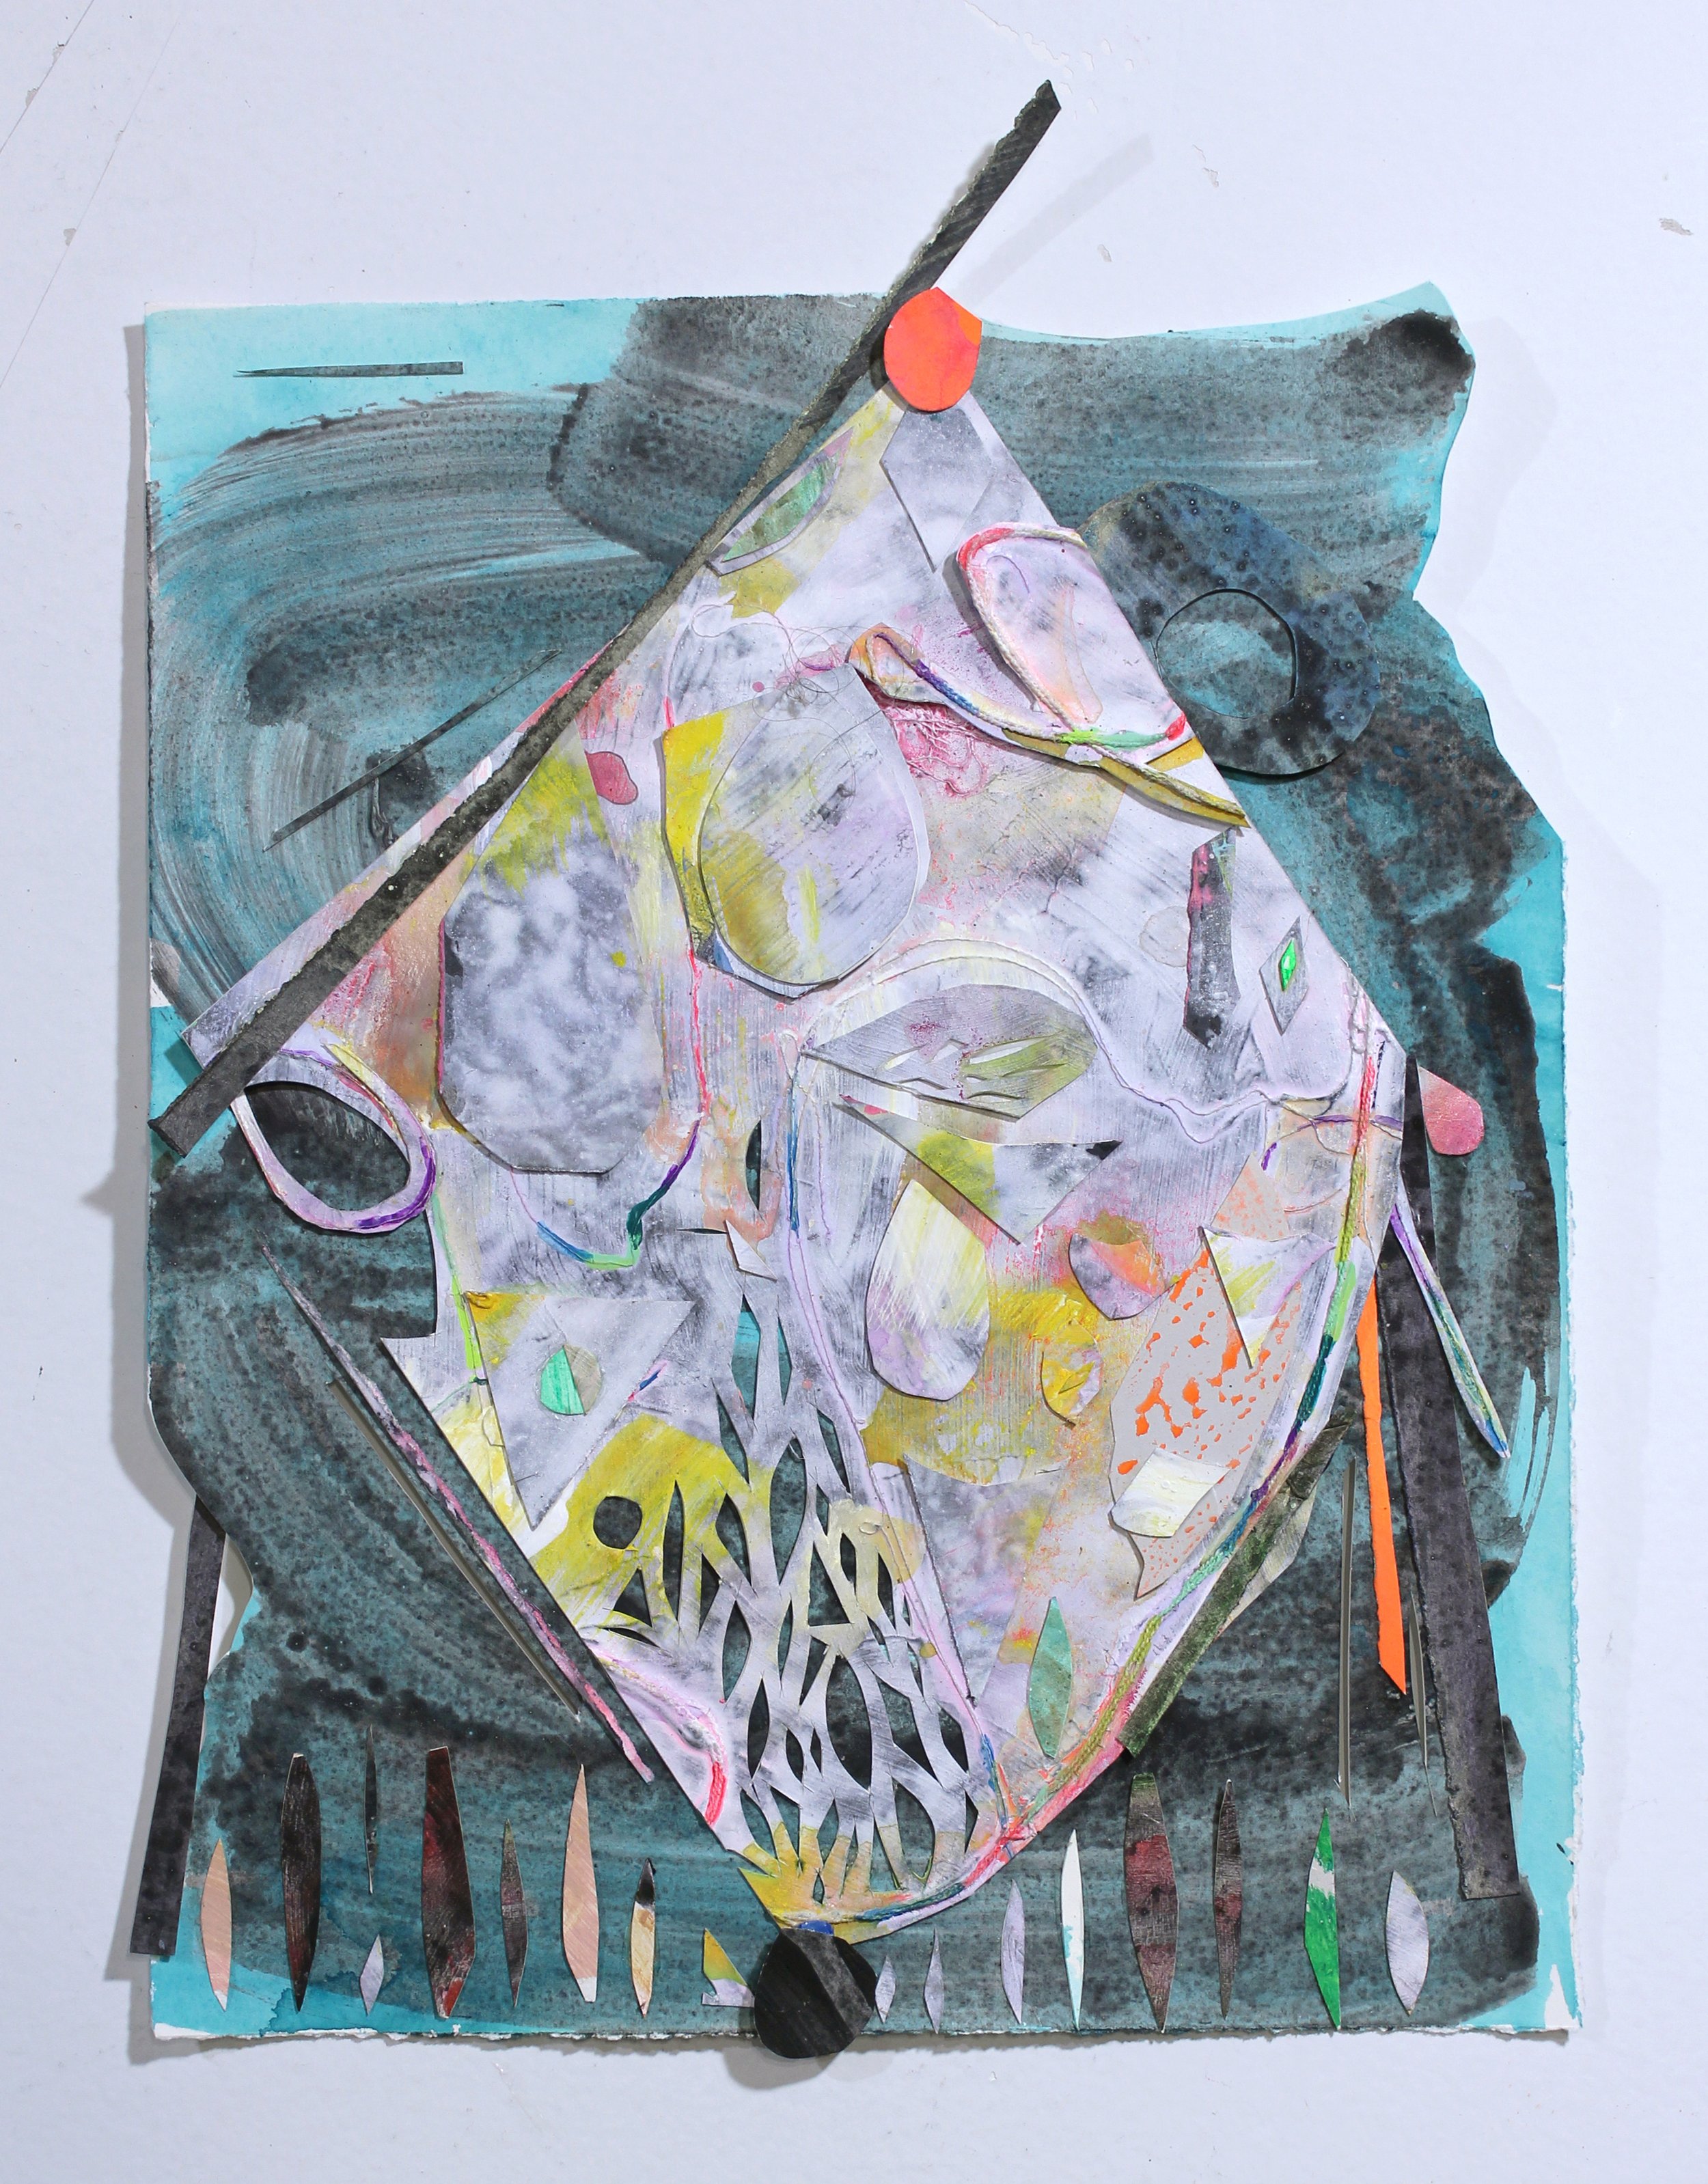   Abyss Face , 2020 Graphite powder, gouache, acrylic, watercolor and string on cut and collaged paper 16 x 11 inches  